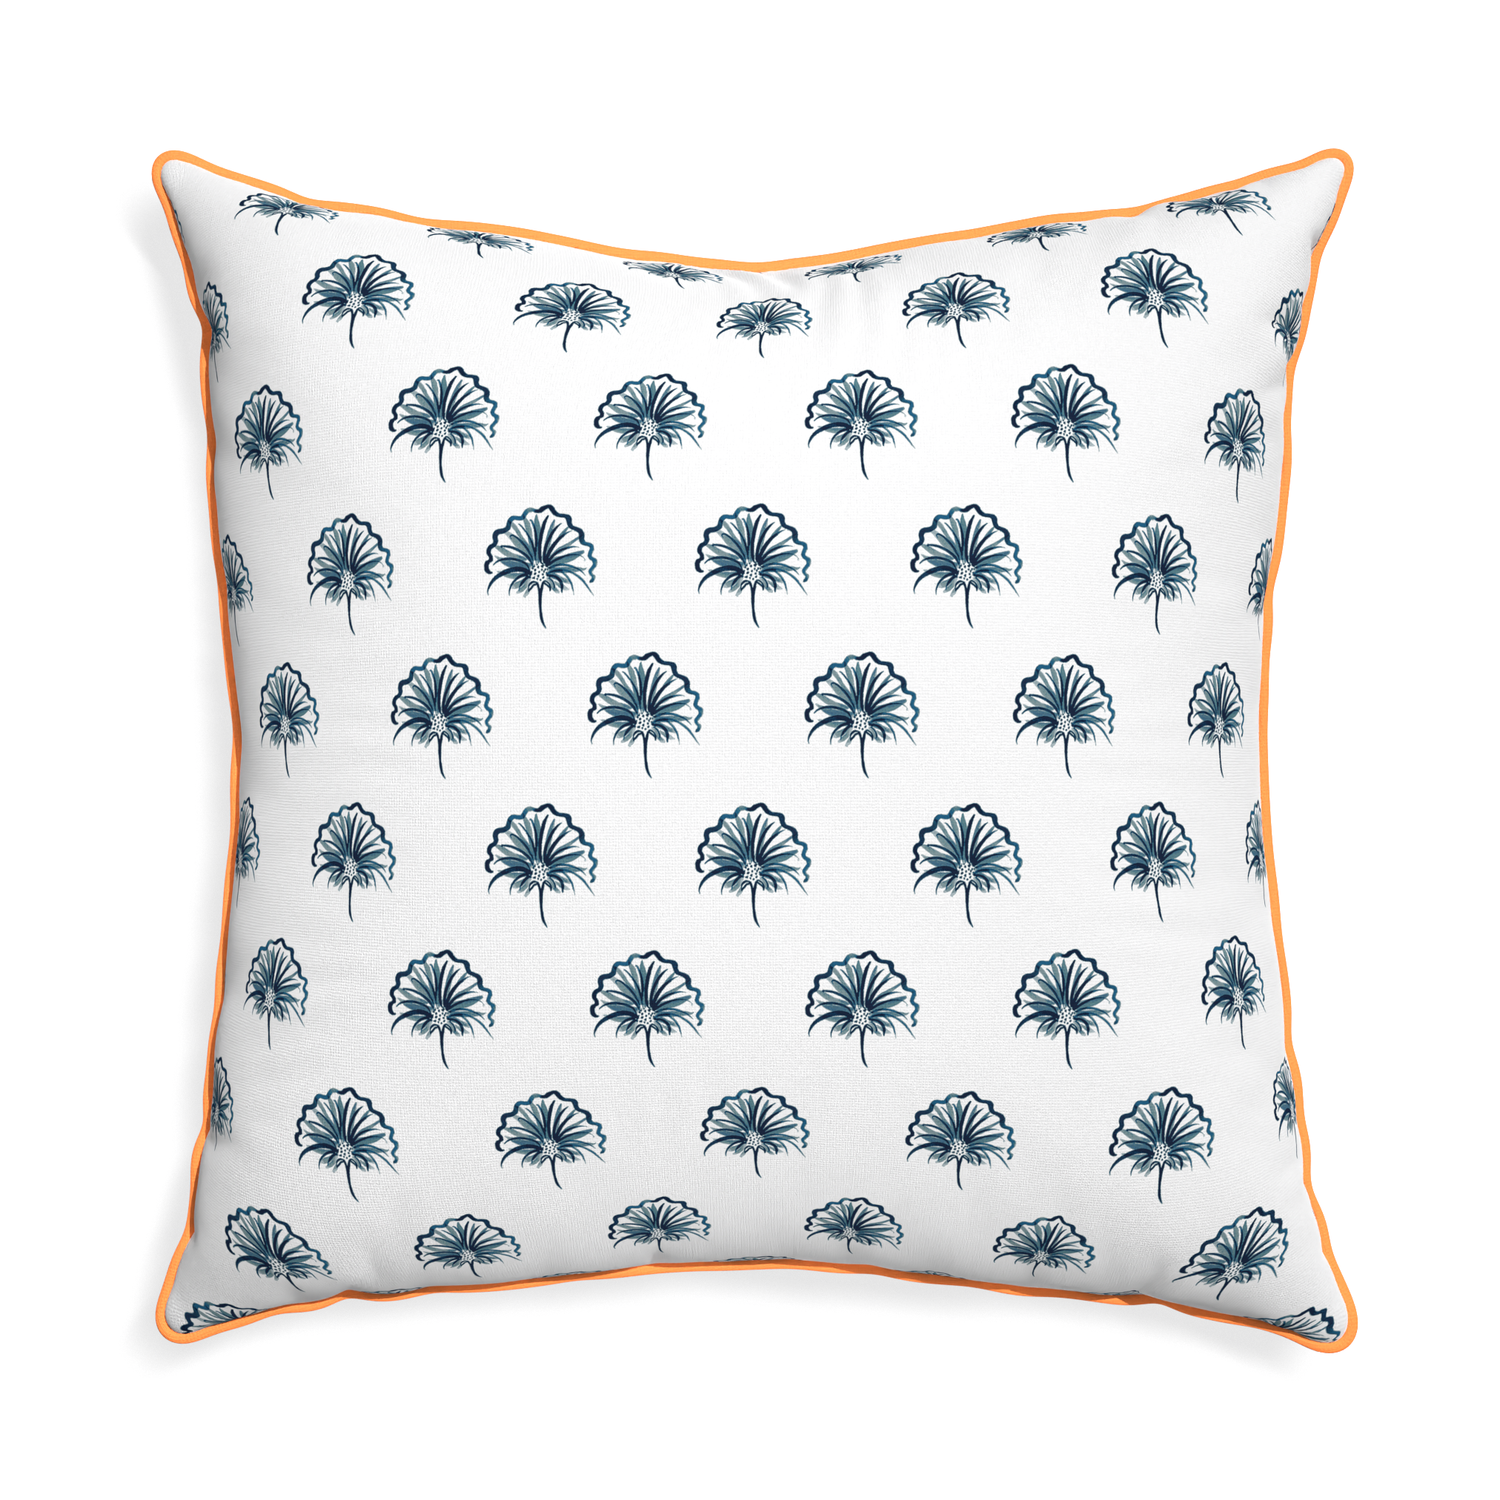 Euro-sham penelope midnight custom floral navypillow with clementine piping on white background